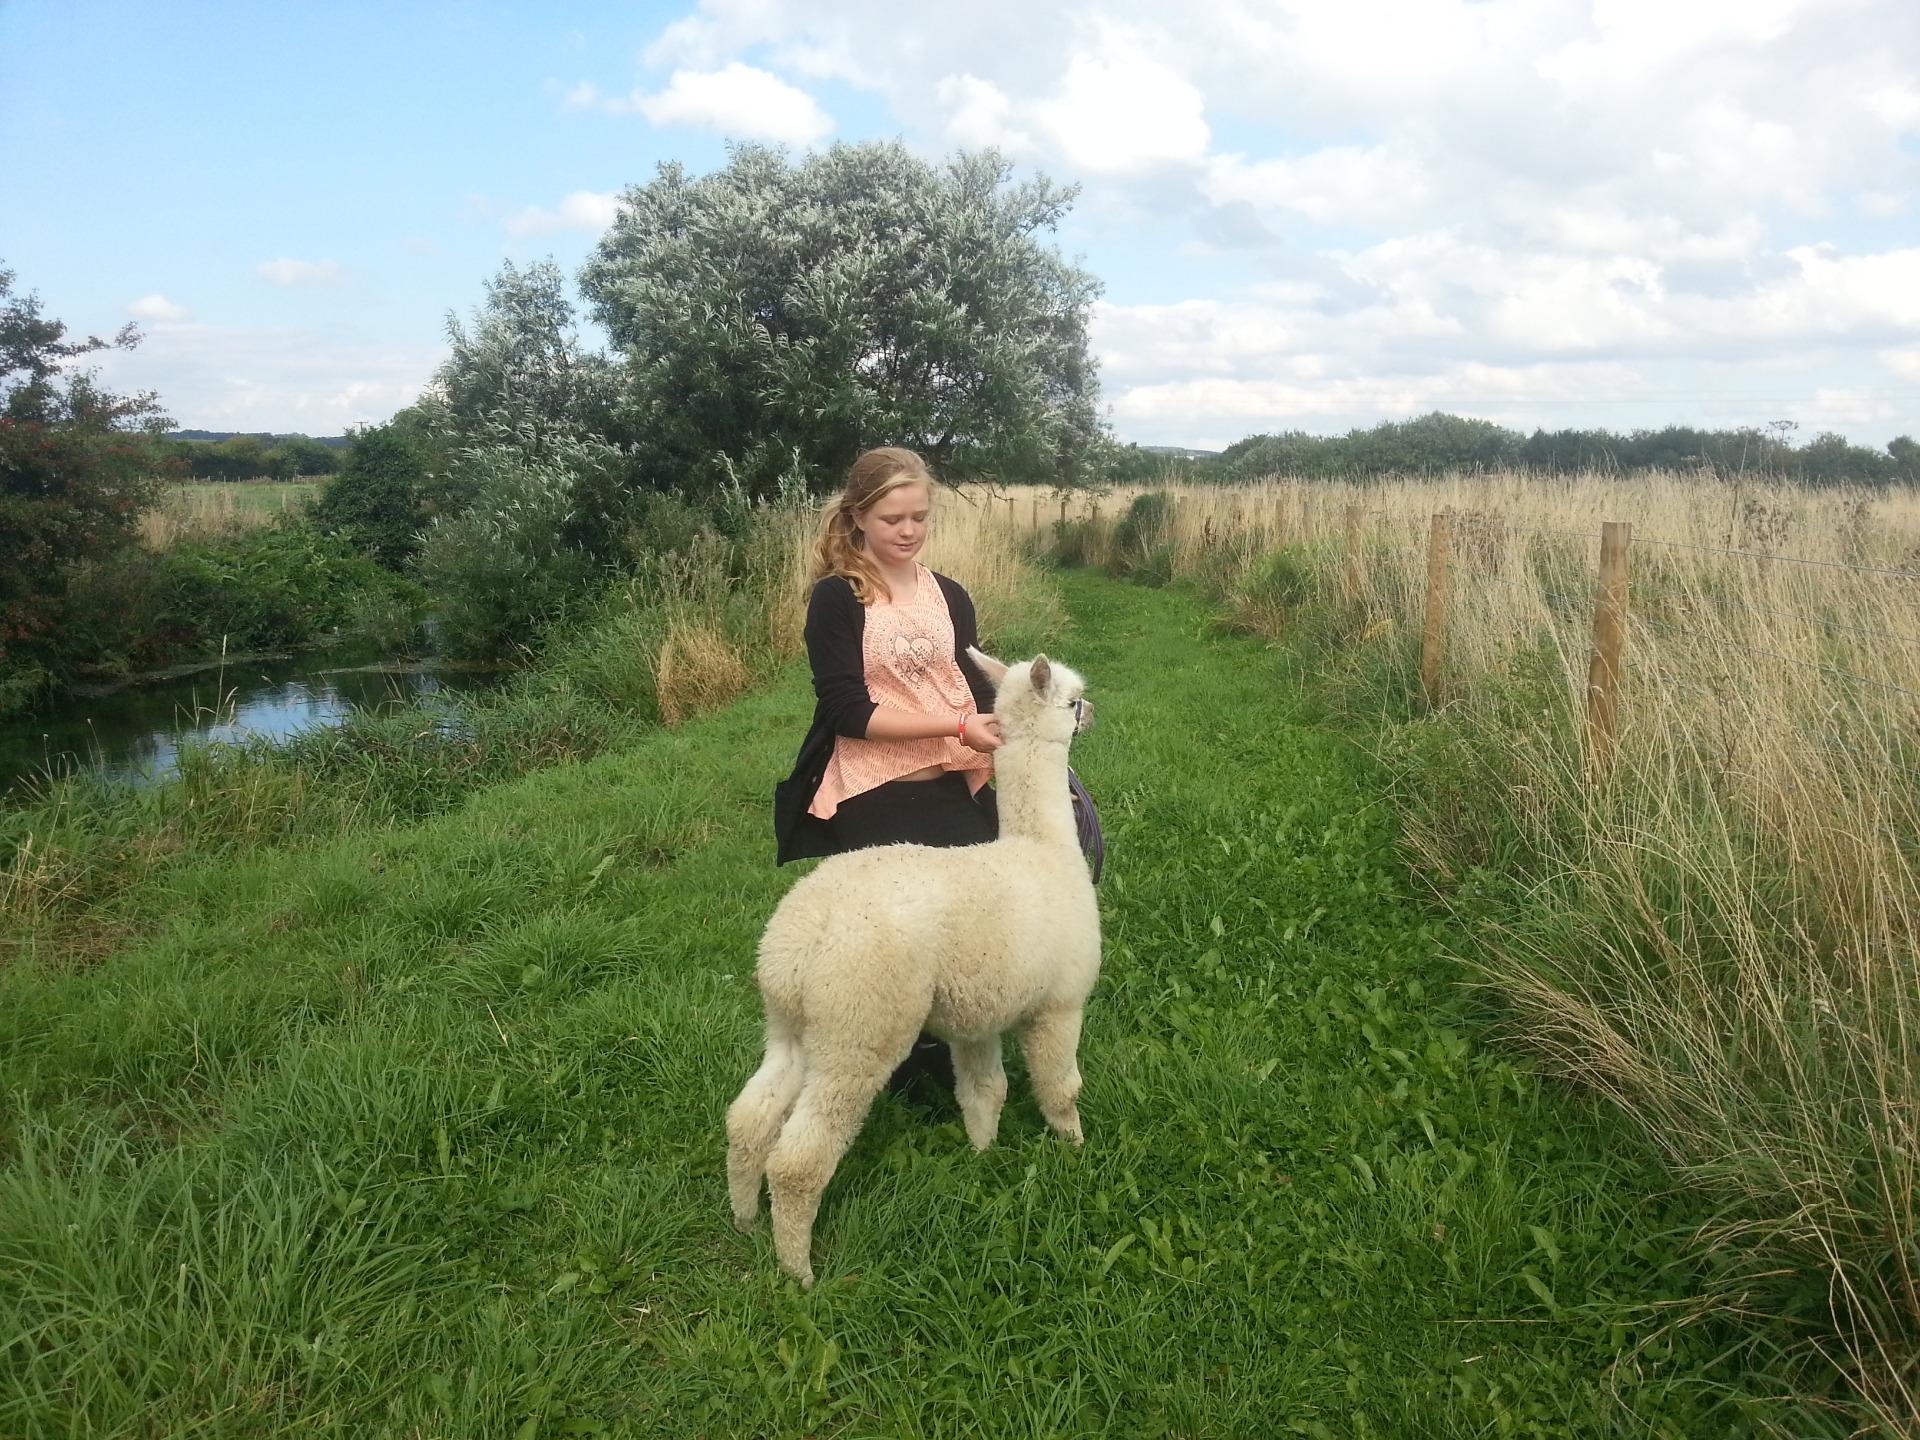 Blonde-haired girl wearing pink top and black cardiagan, stroking a white coated alpaca